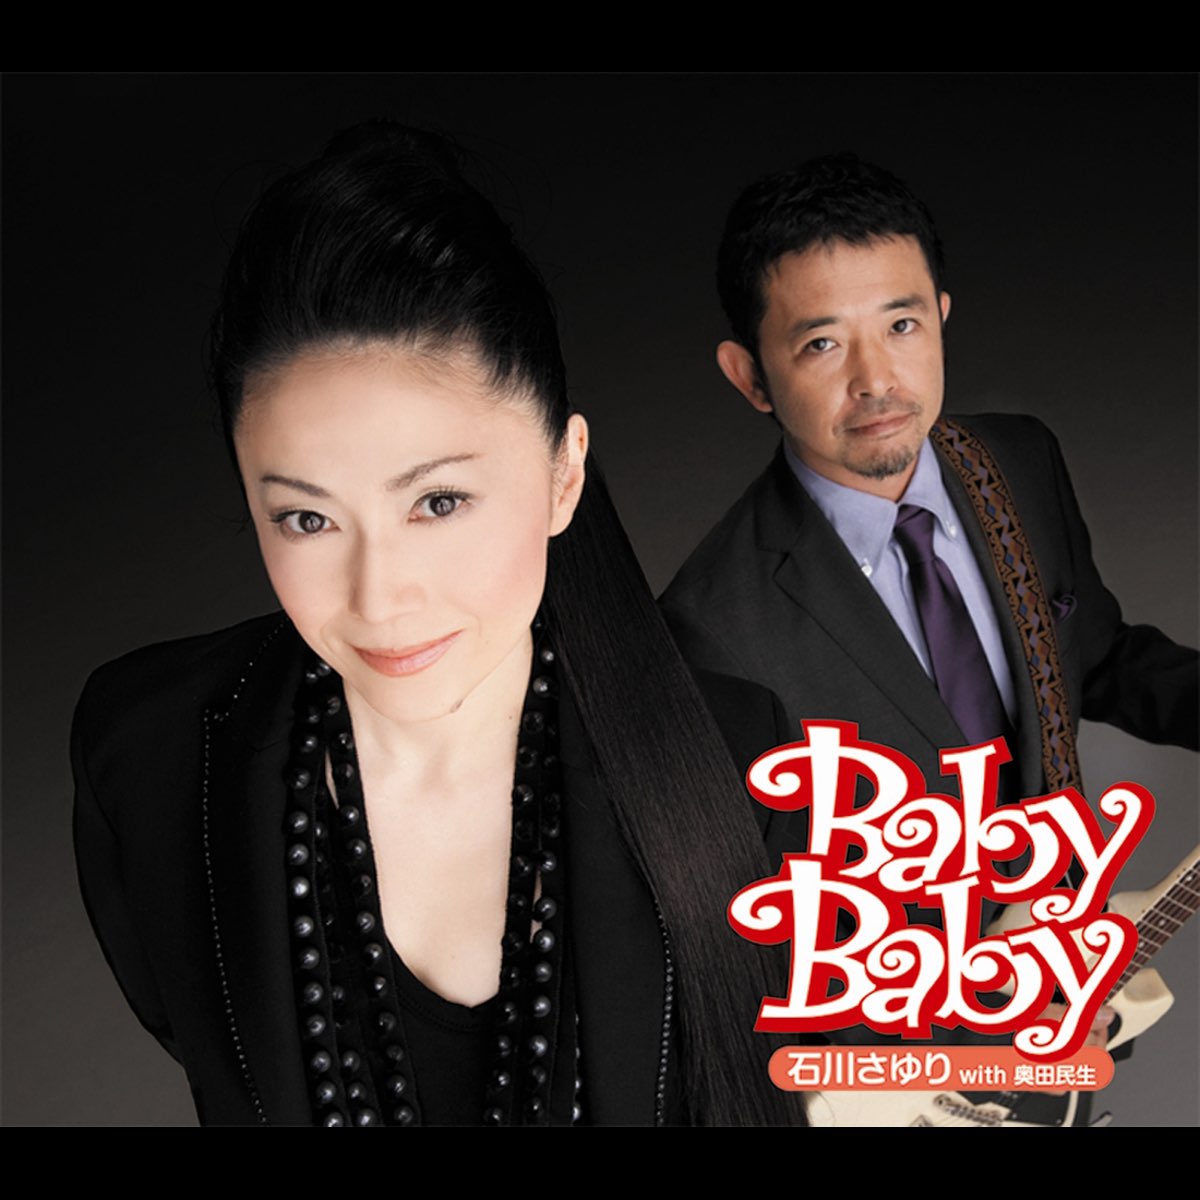 Apple Music 上石川さゆりwith 奥田民生的专辑 Baby Baby Ep